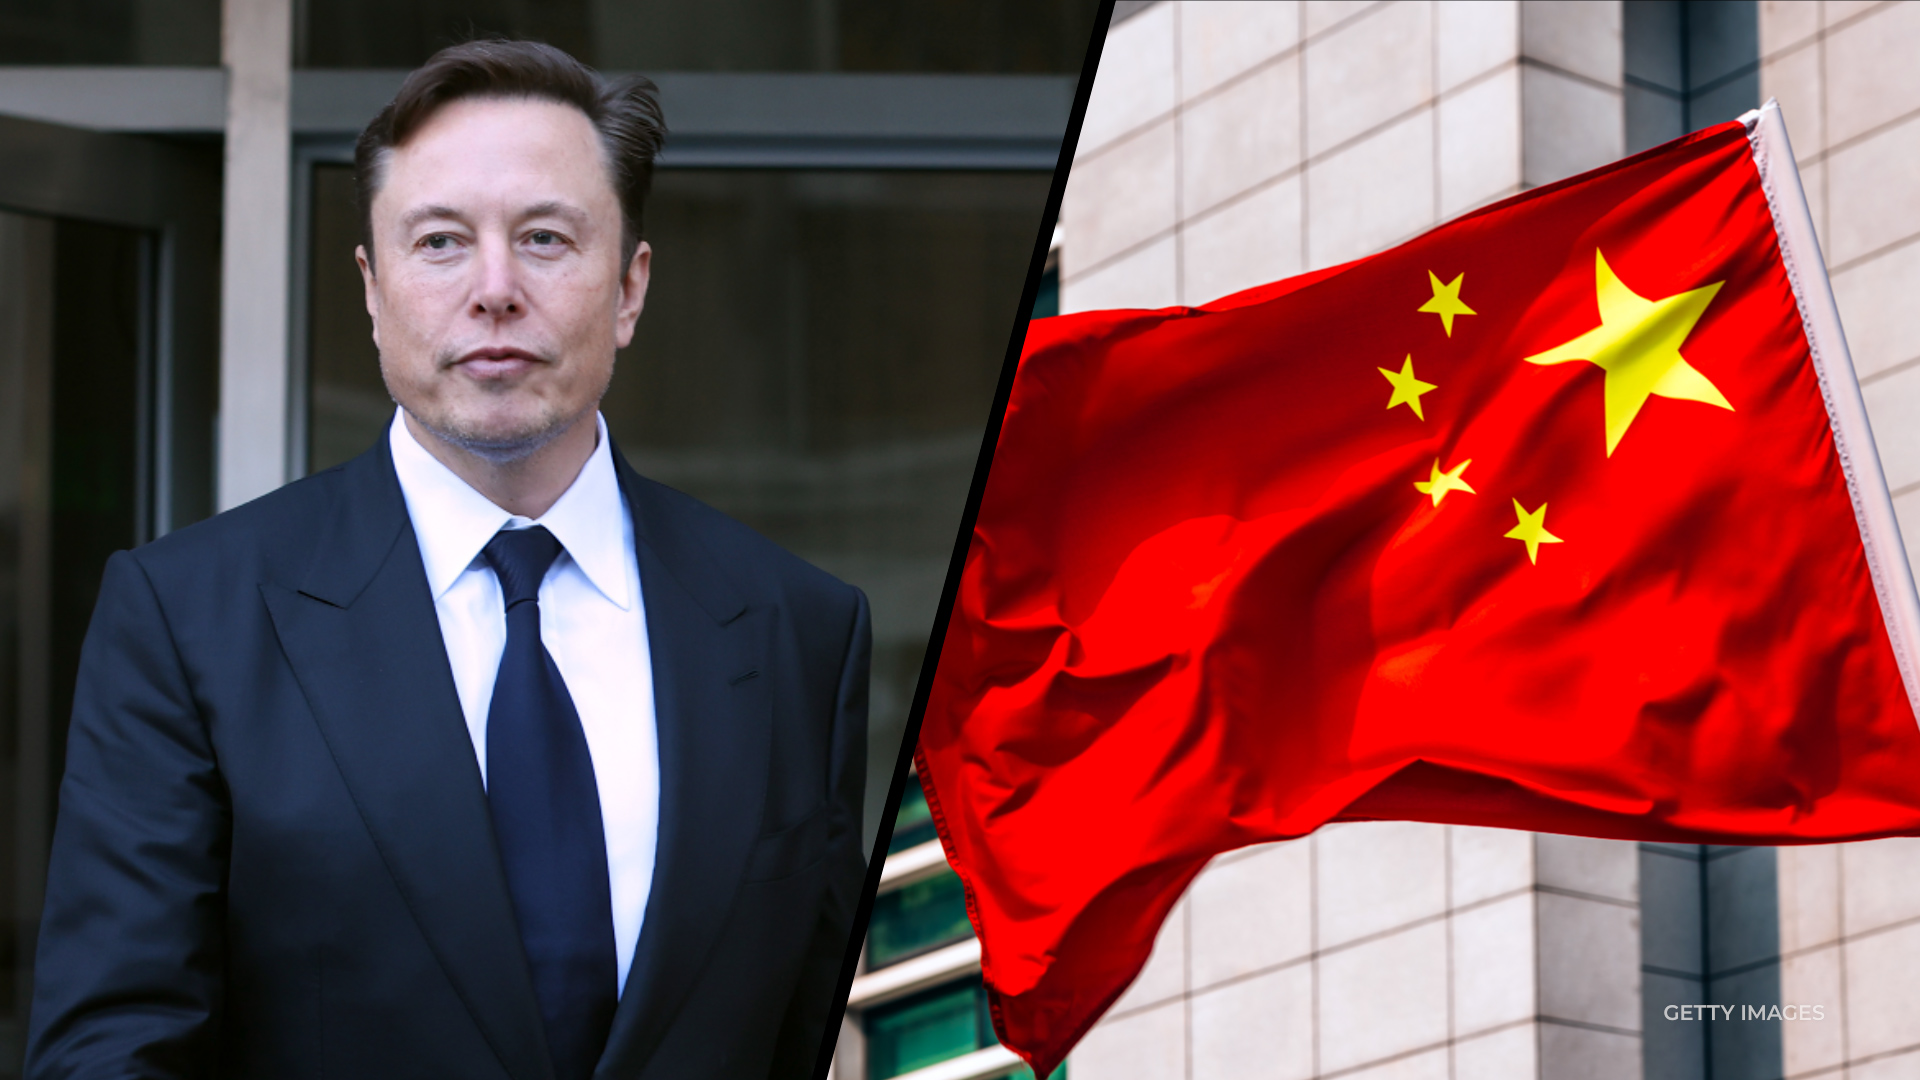 China warns Elon Musk's COVID-19 comments may damage Tesla's ties with the country, as U.S. agencies contend China lab leak theory has standing.